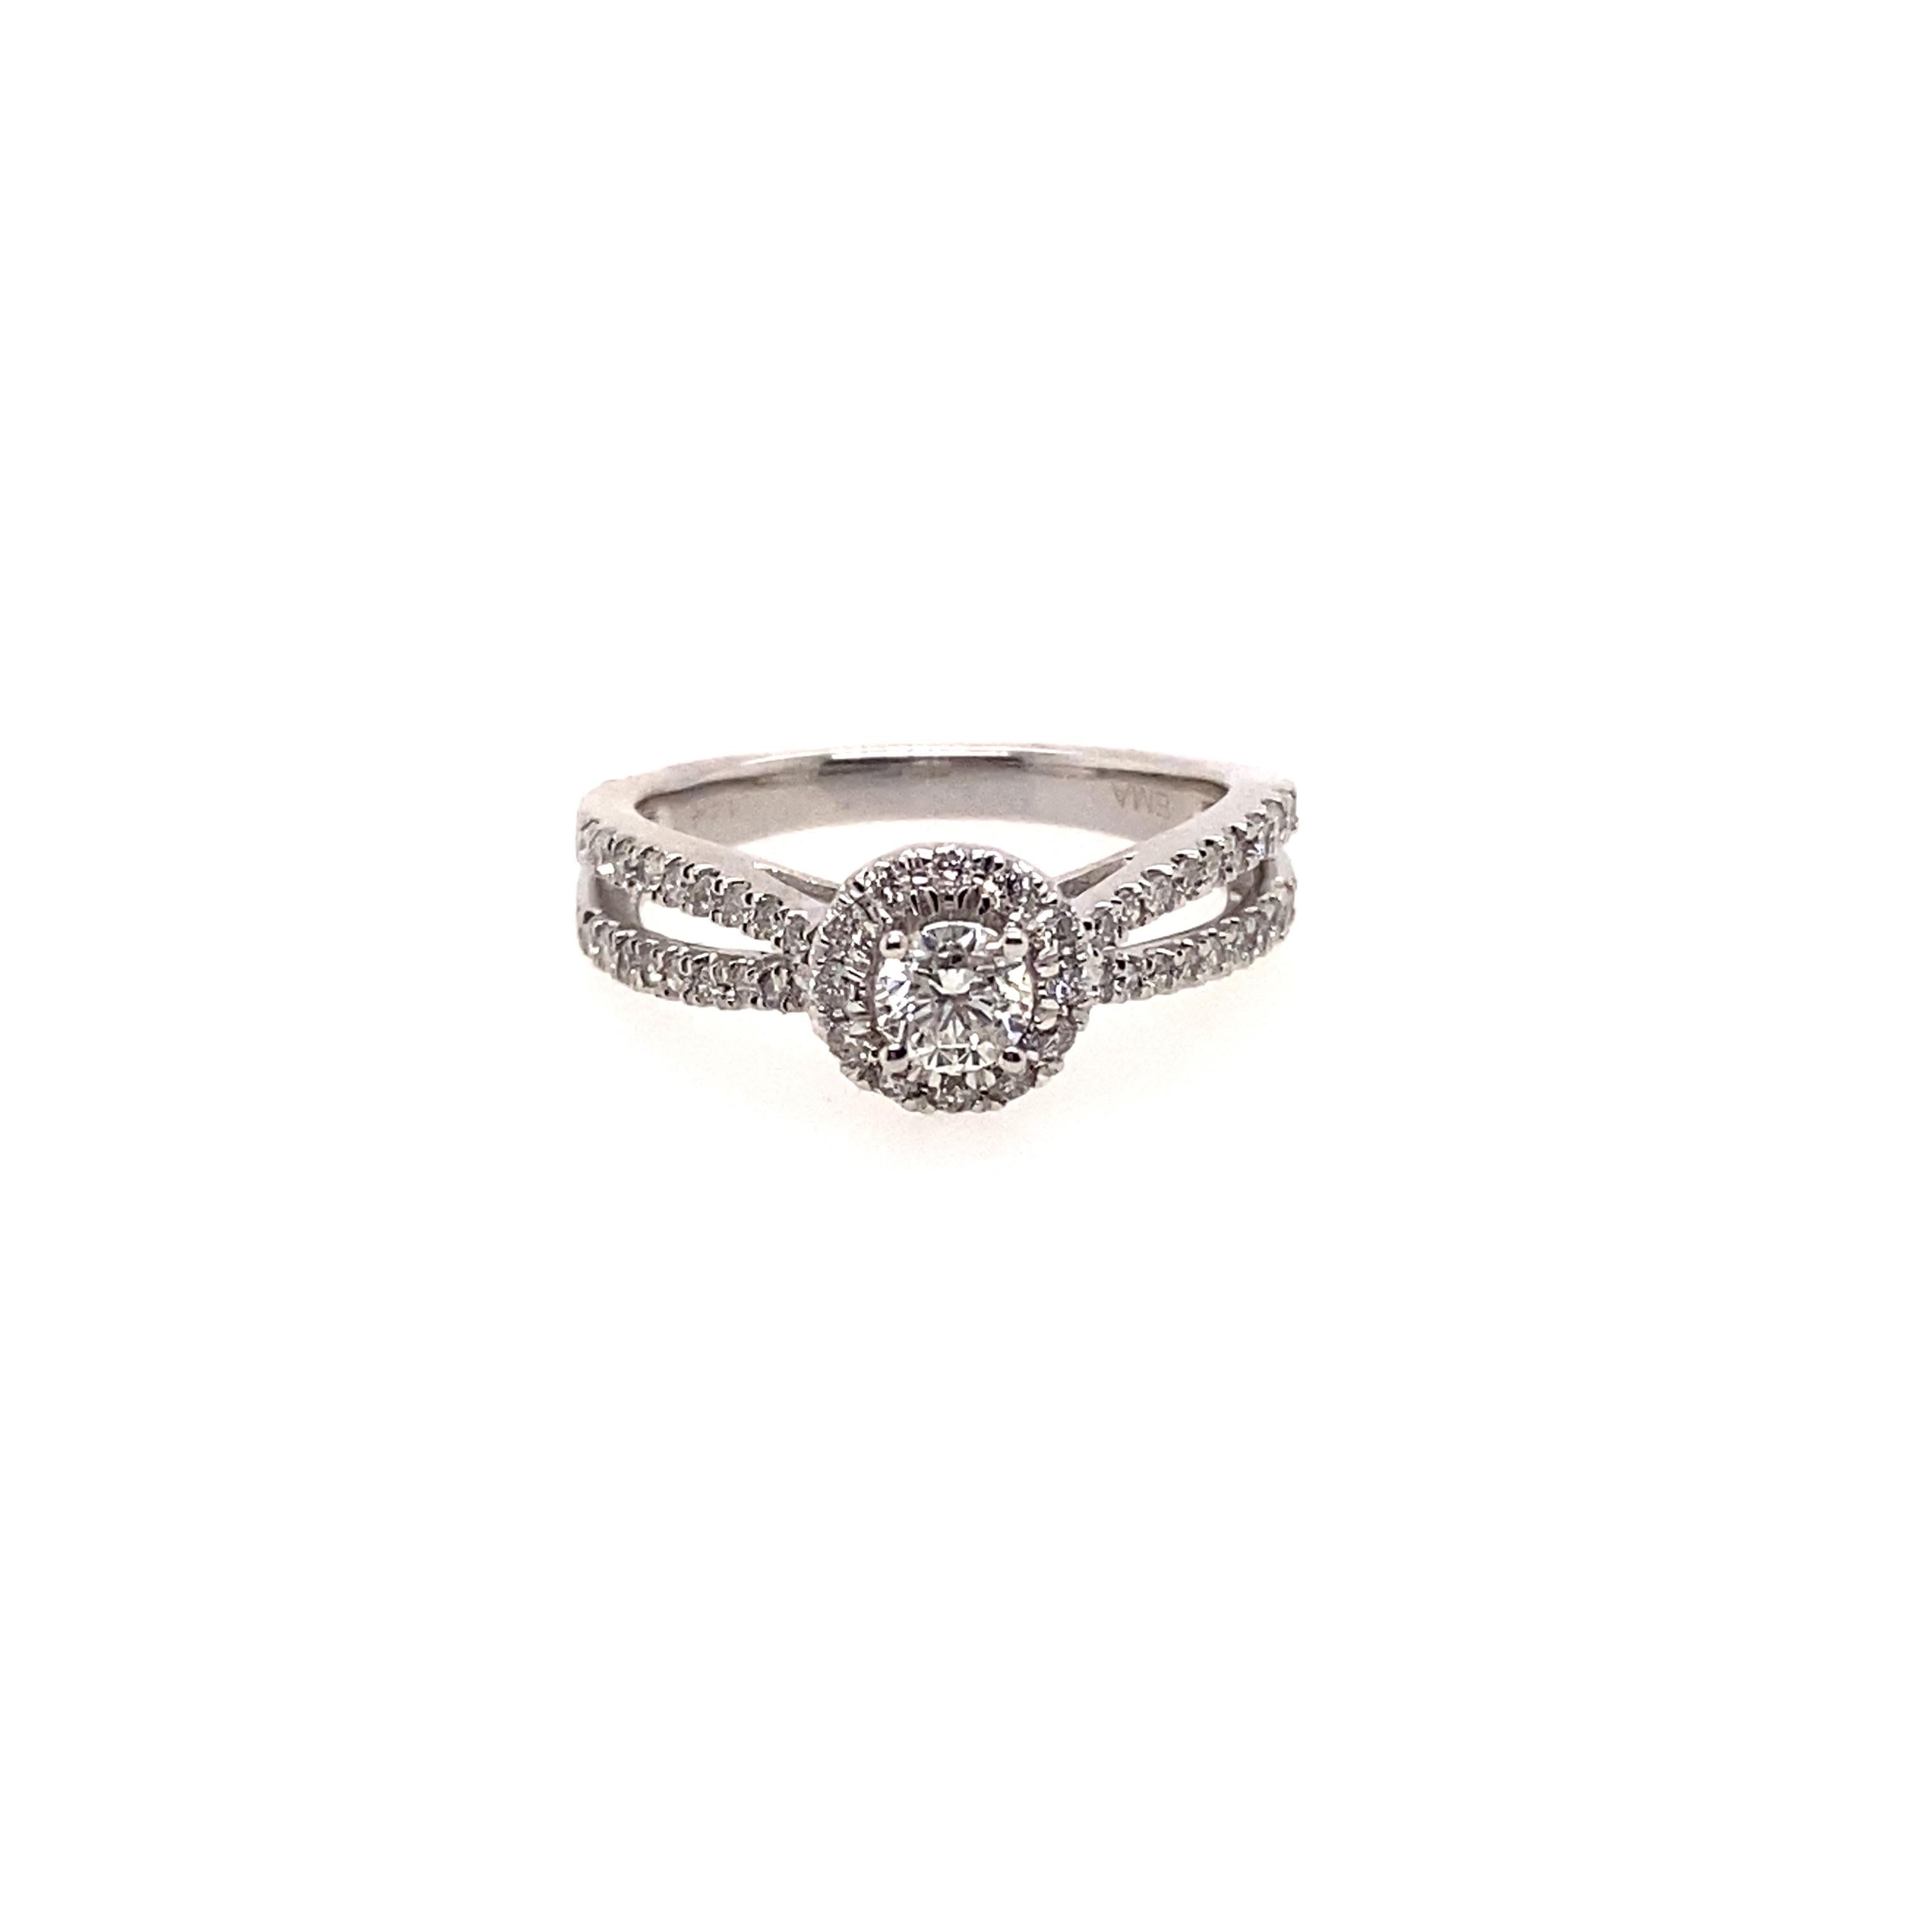 Perfect for the woman who loves a classic round diamond ring and who likes a little adventure in the shank which is designed as 14K white gold double loop ring. Center stone 0.35 carat diamond is surrounded by a halo of round diamonds and the double